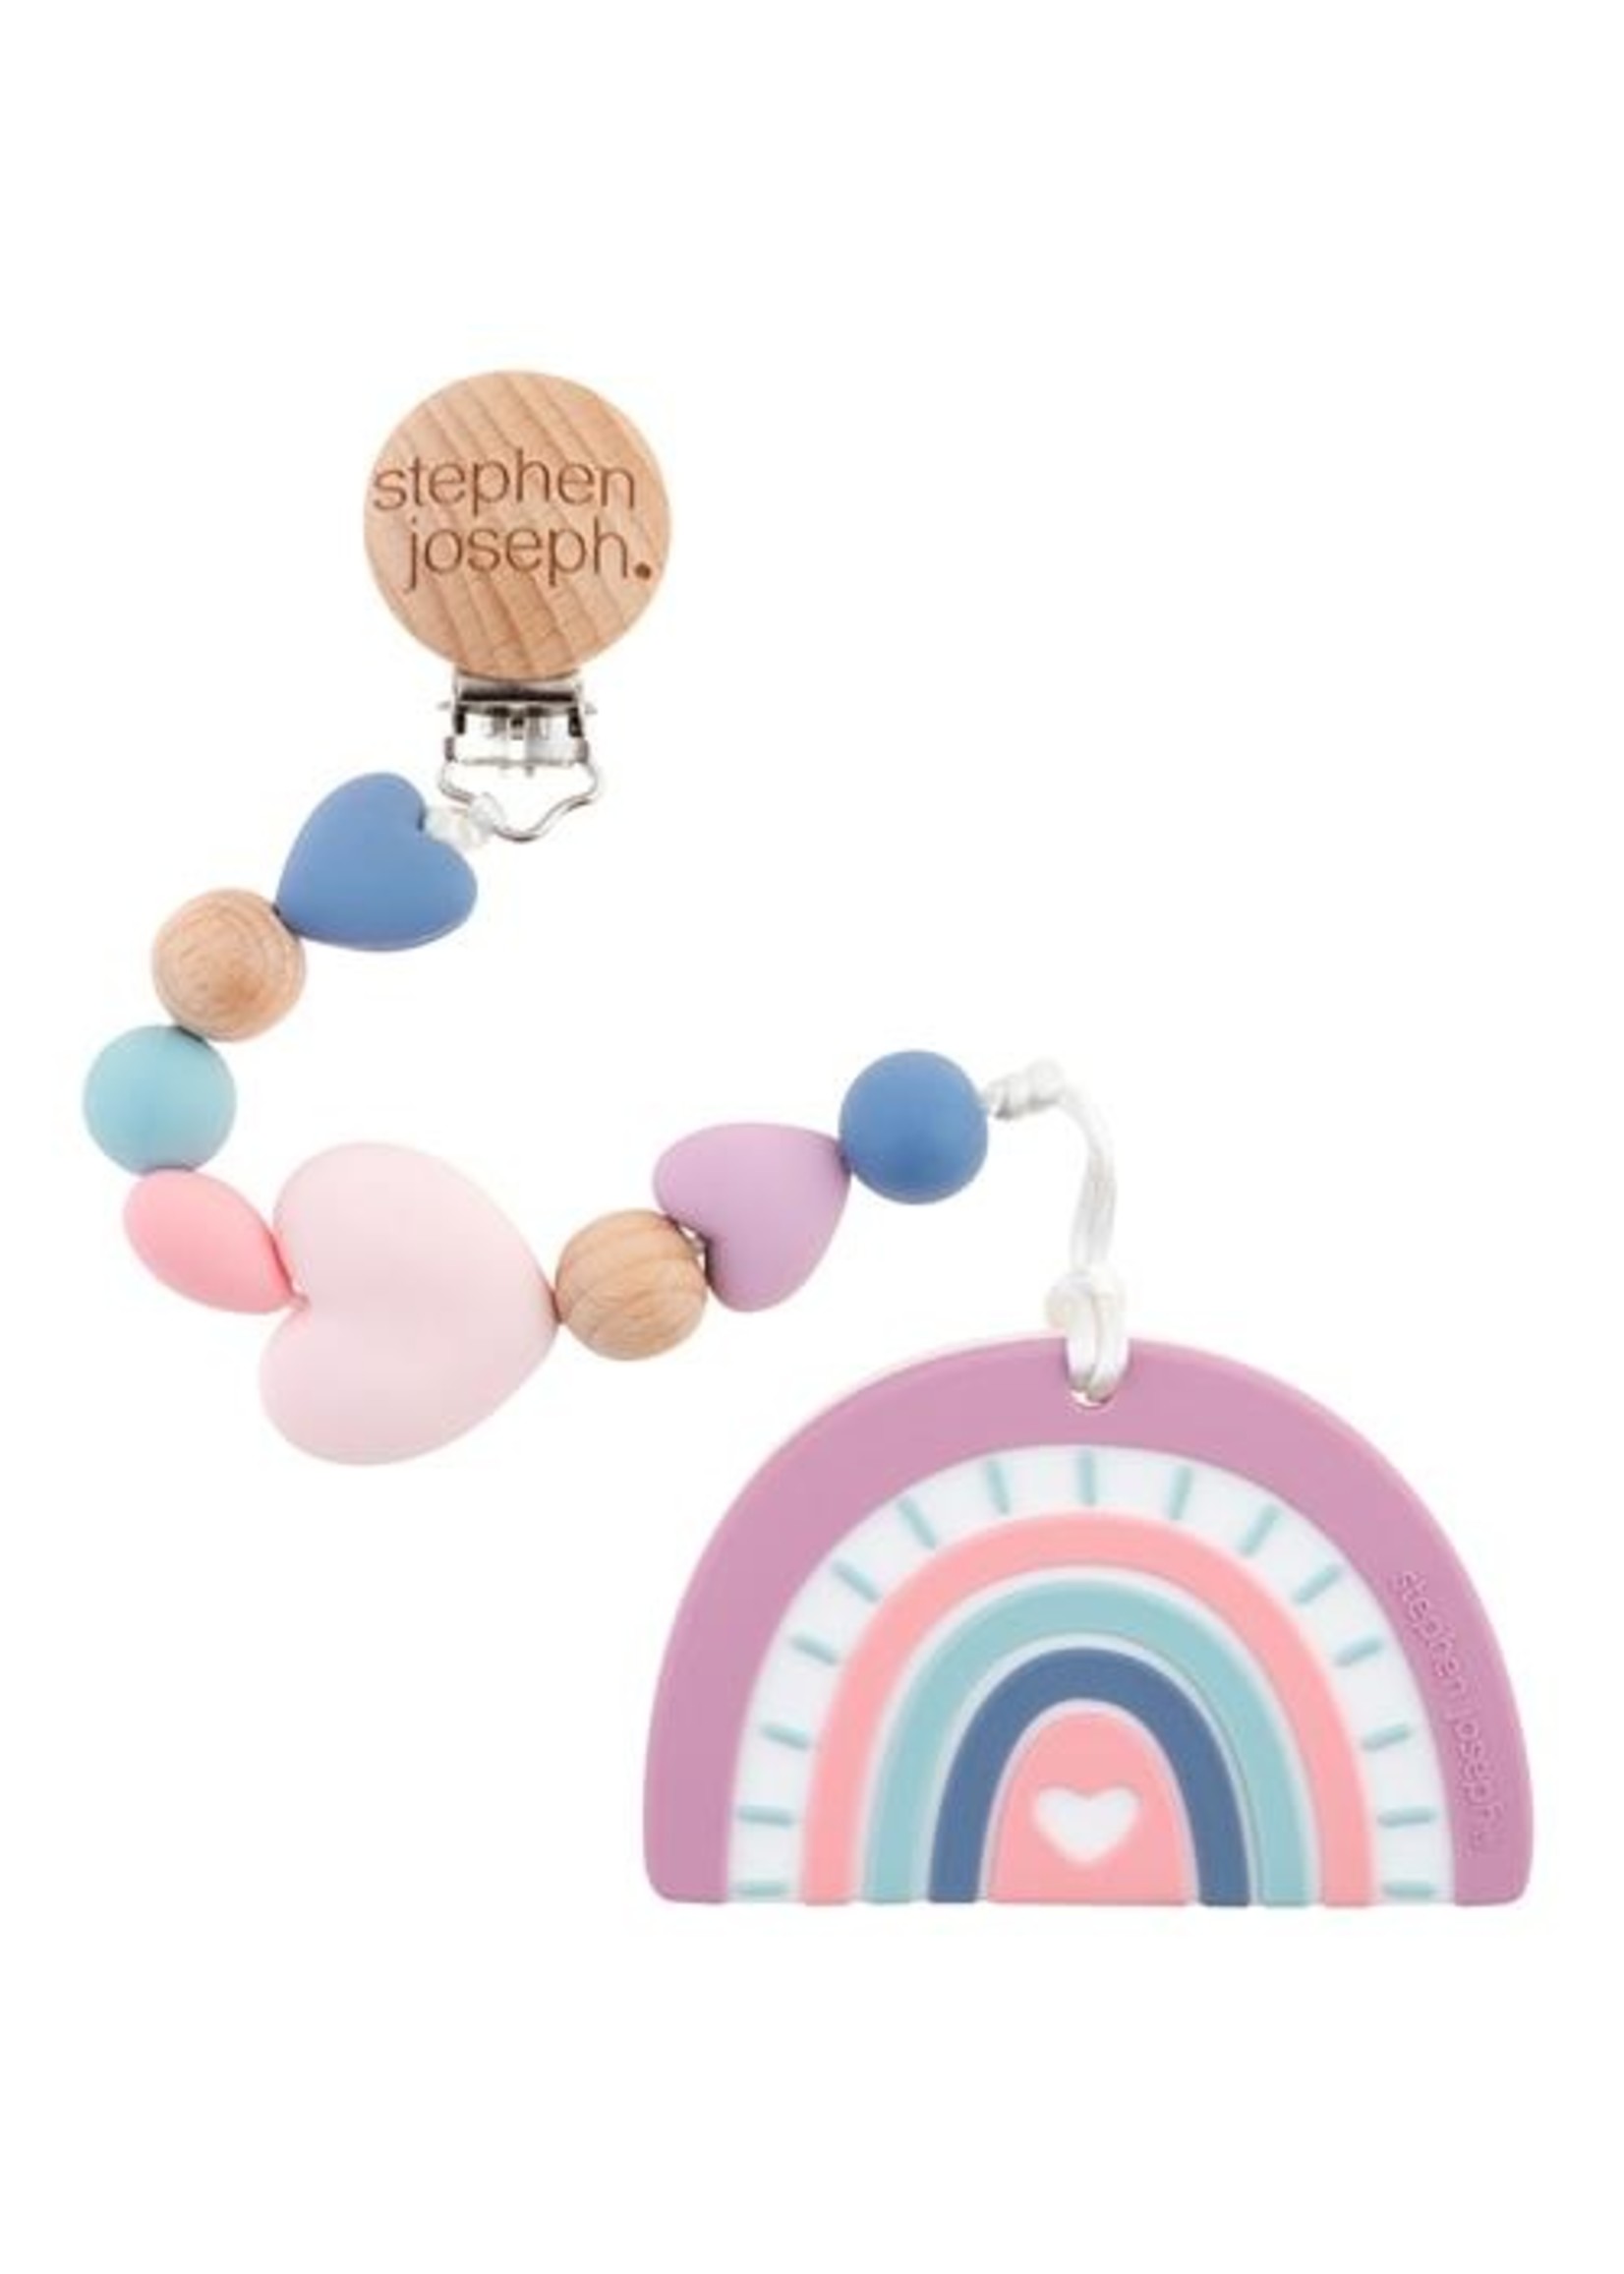 stephen joseph Silicone Teether with Pacifier Clip Rainbow